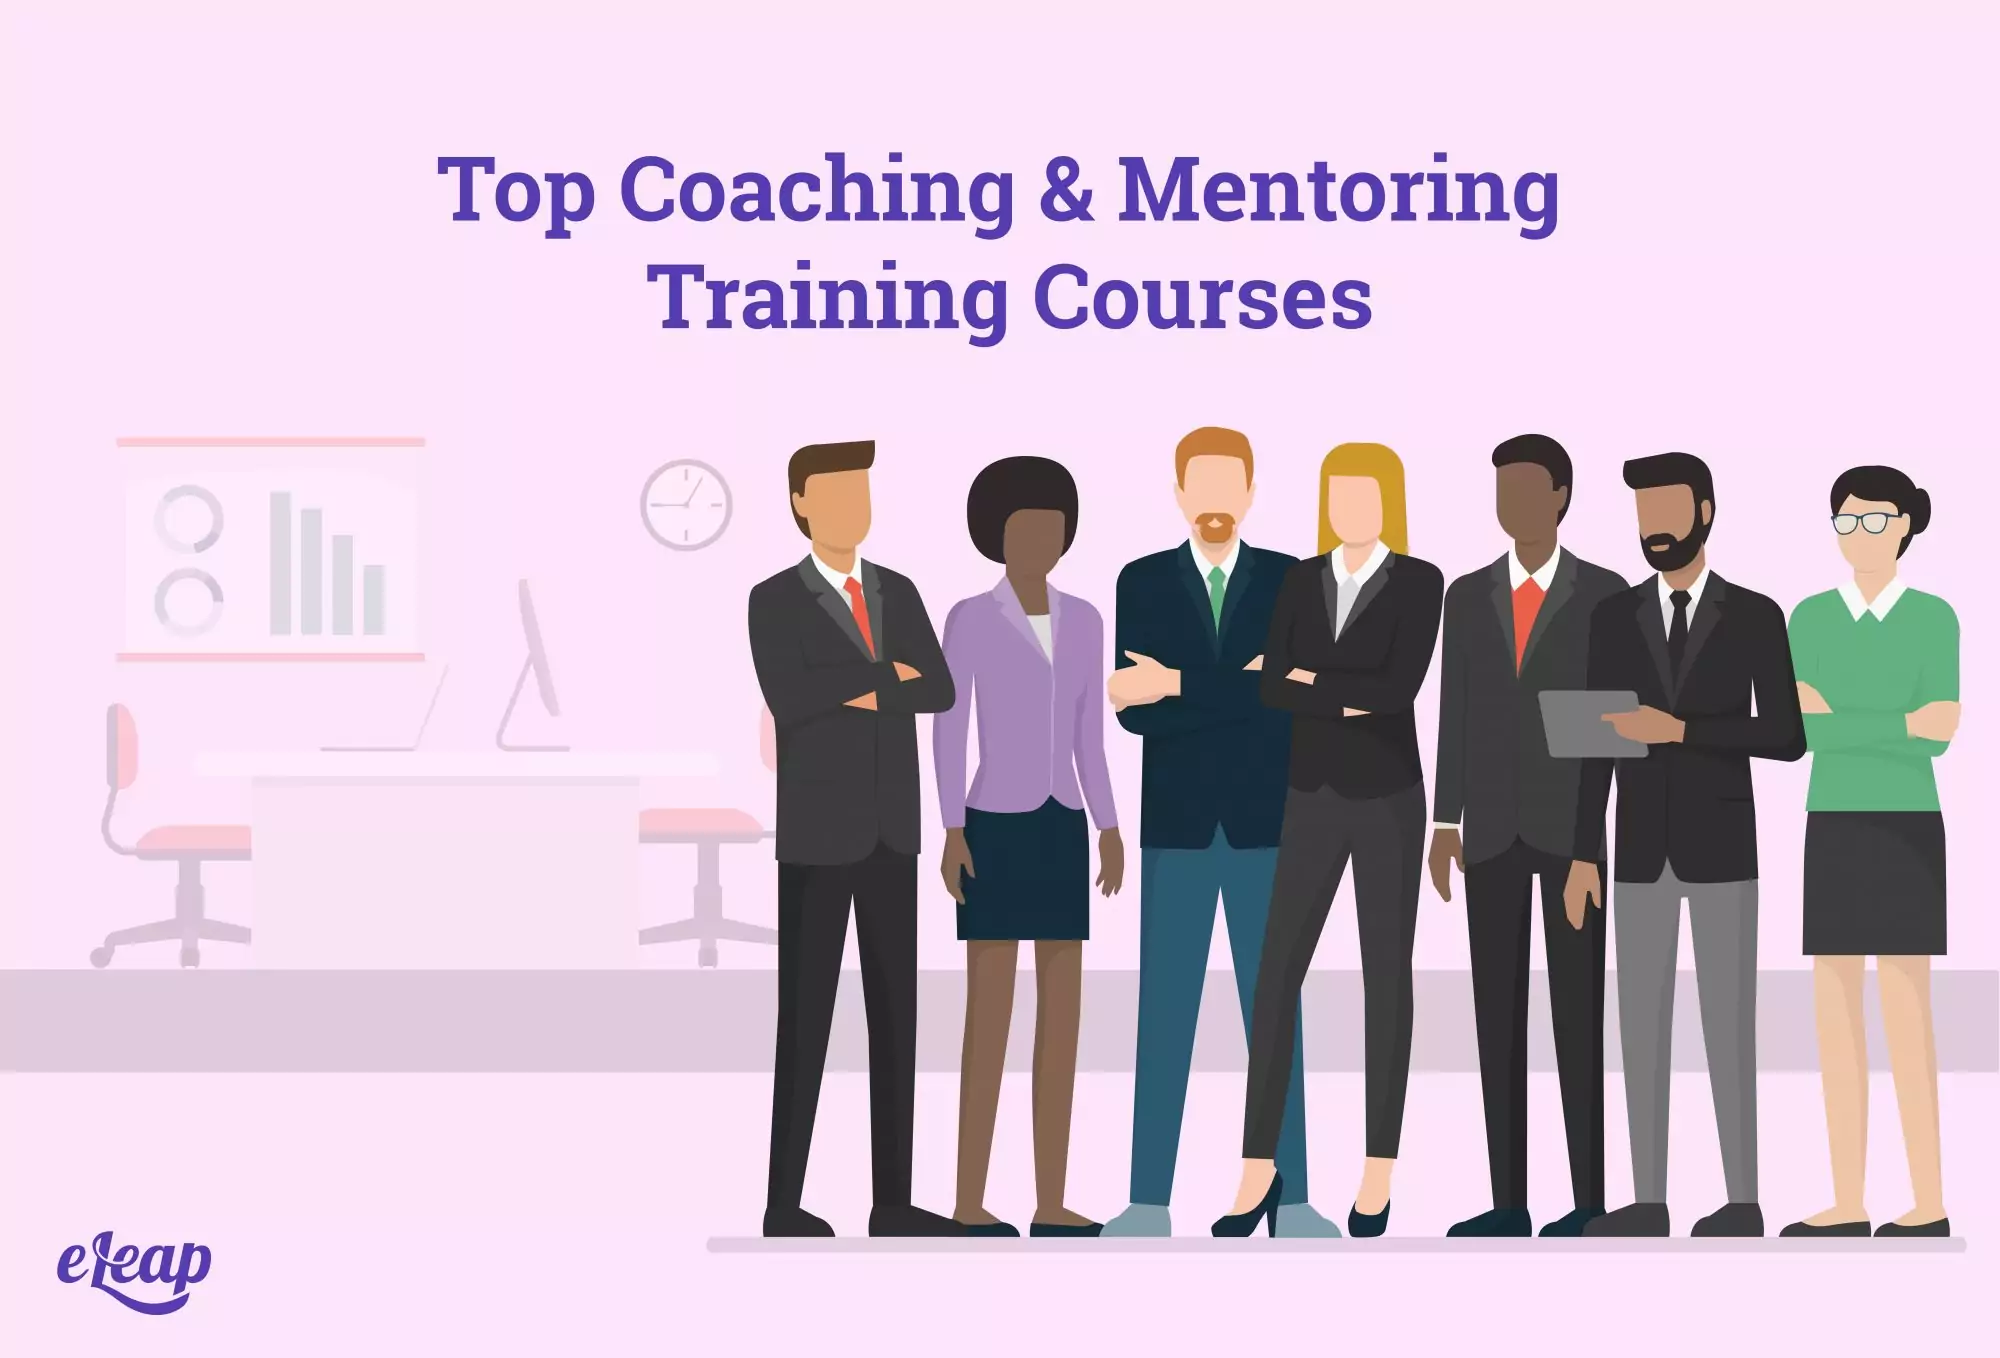 Top-Coaching and Mentoring Training Courses